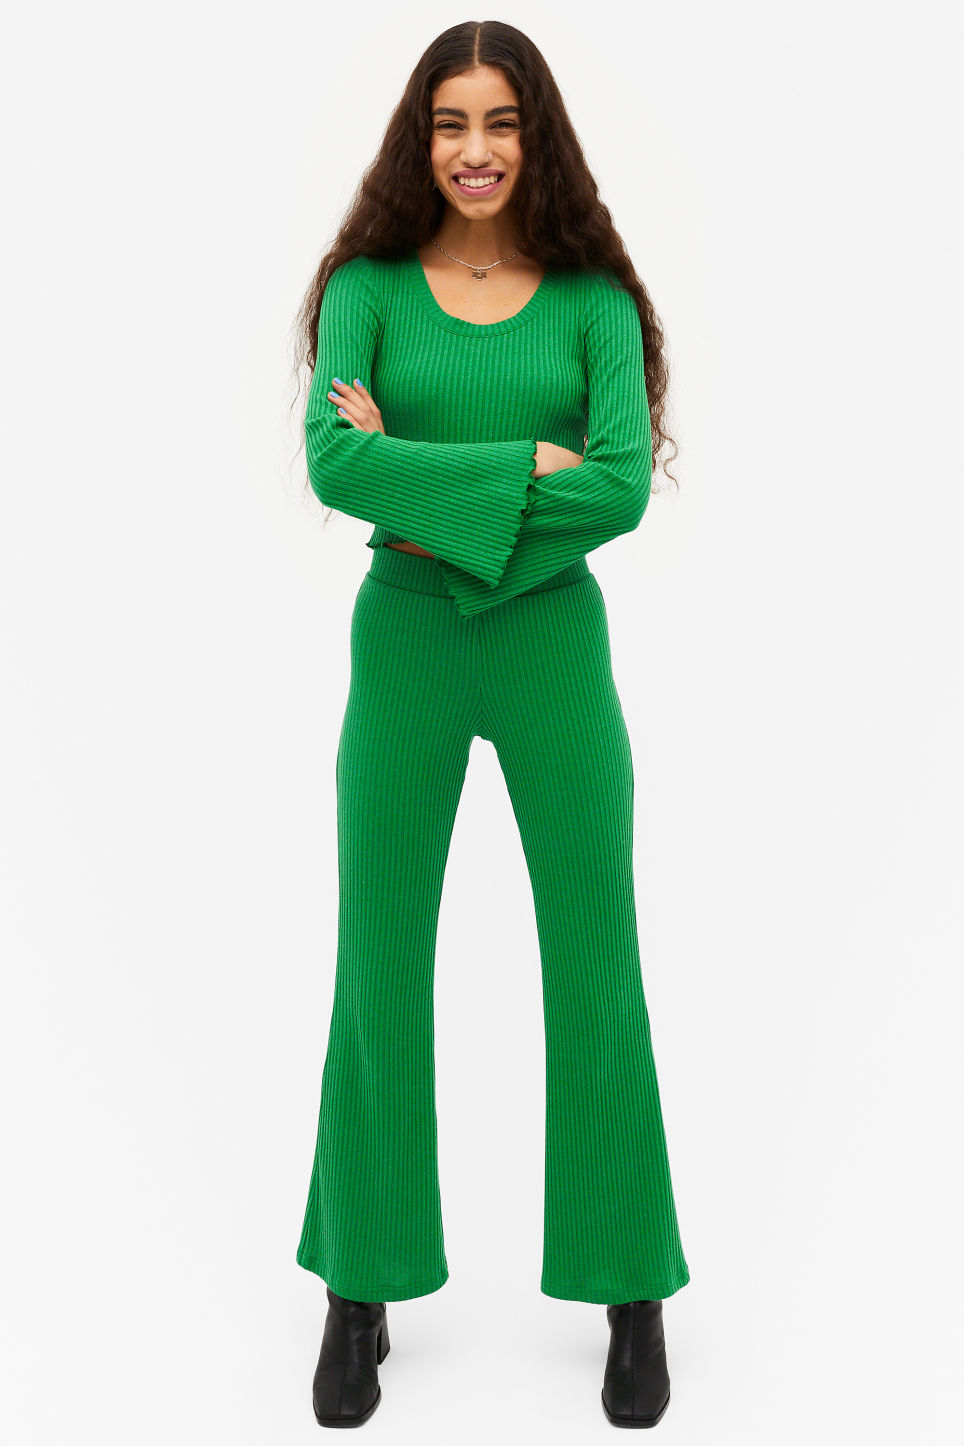 
Green flared sleeve ribbed knit top and Ribbed knit green trousers